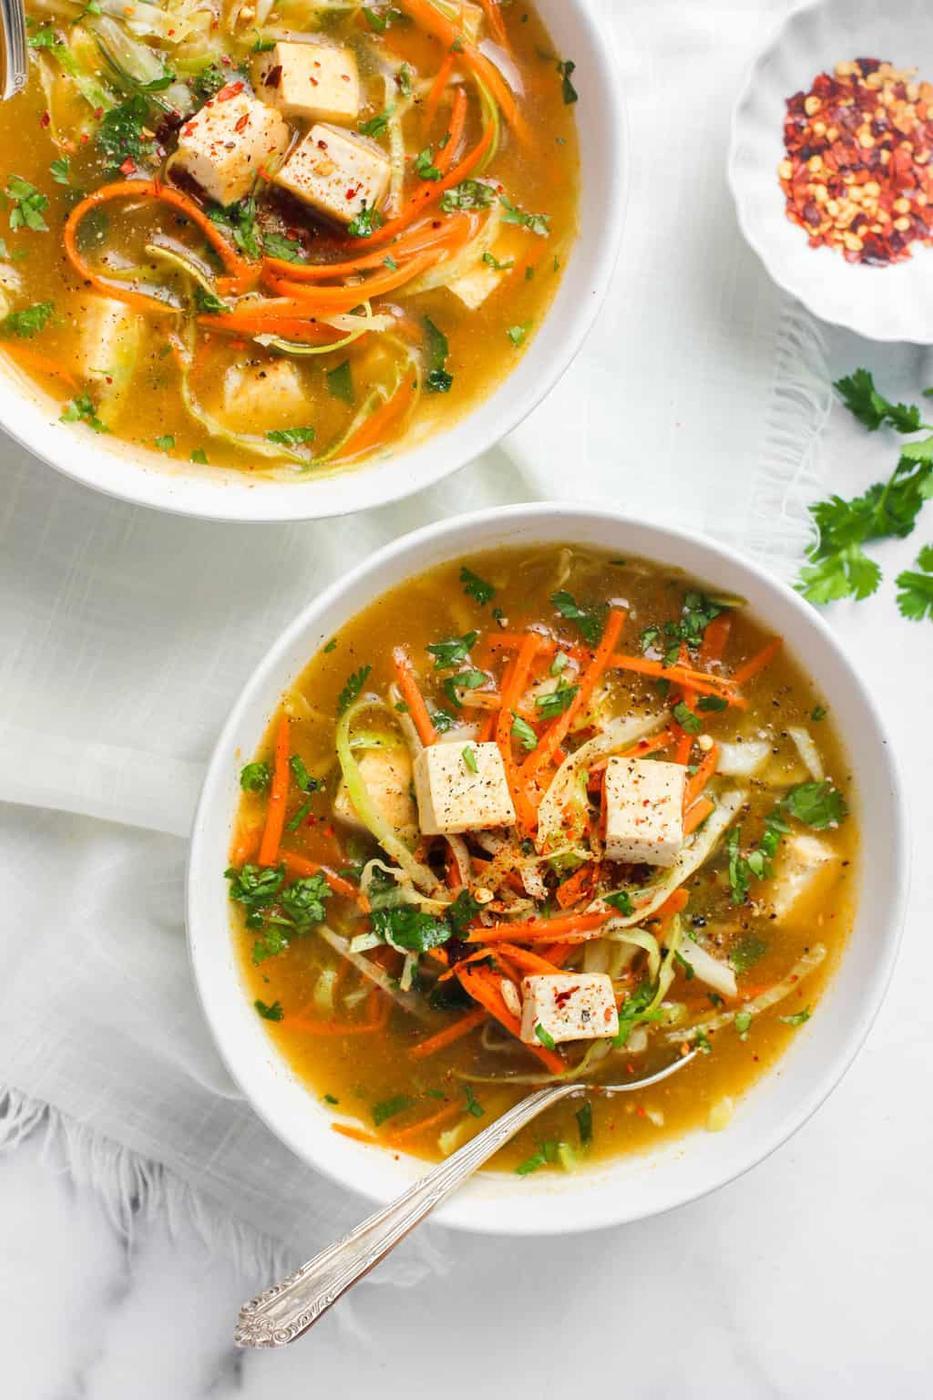 Lemon Coriander Soup With Tofu by Ministry of Curry | Reciplate